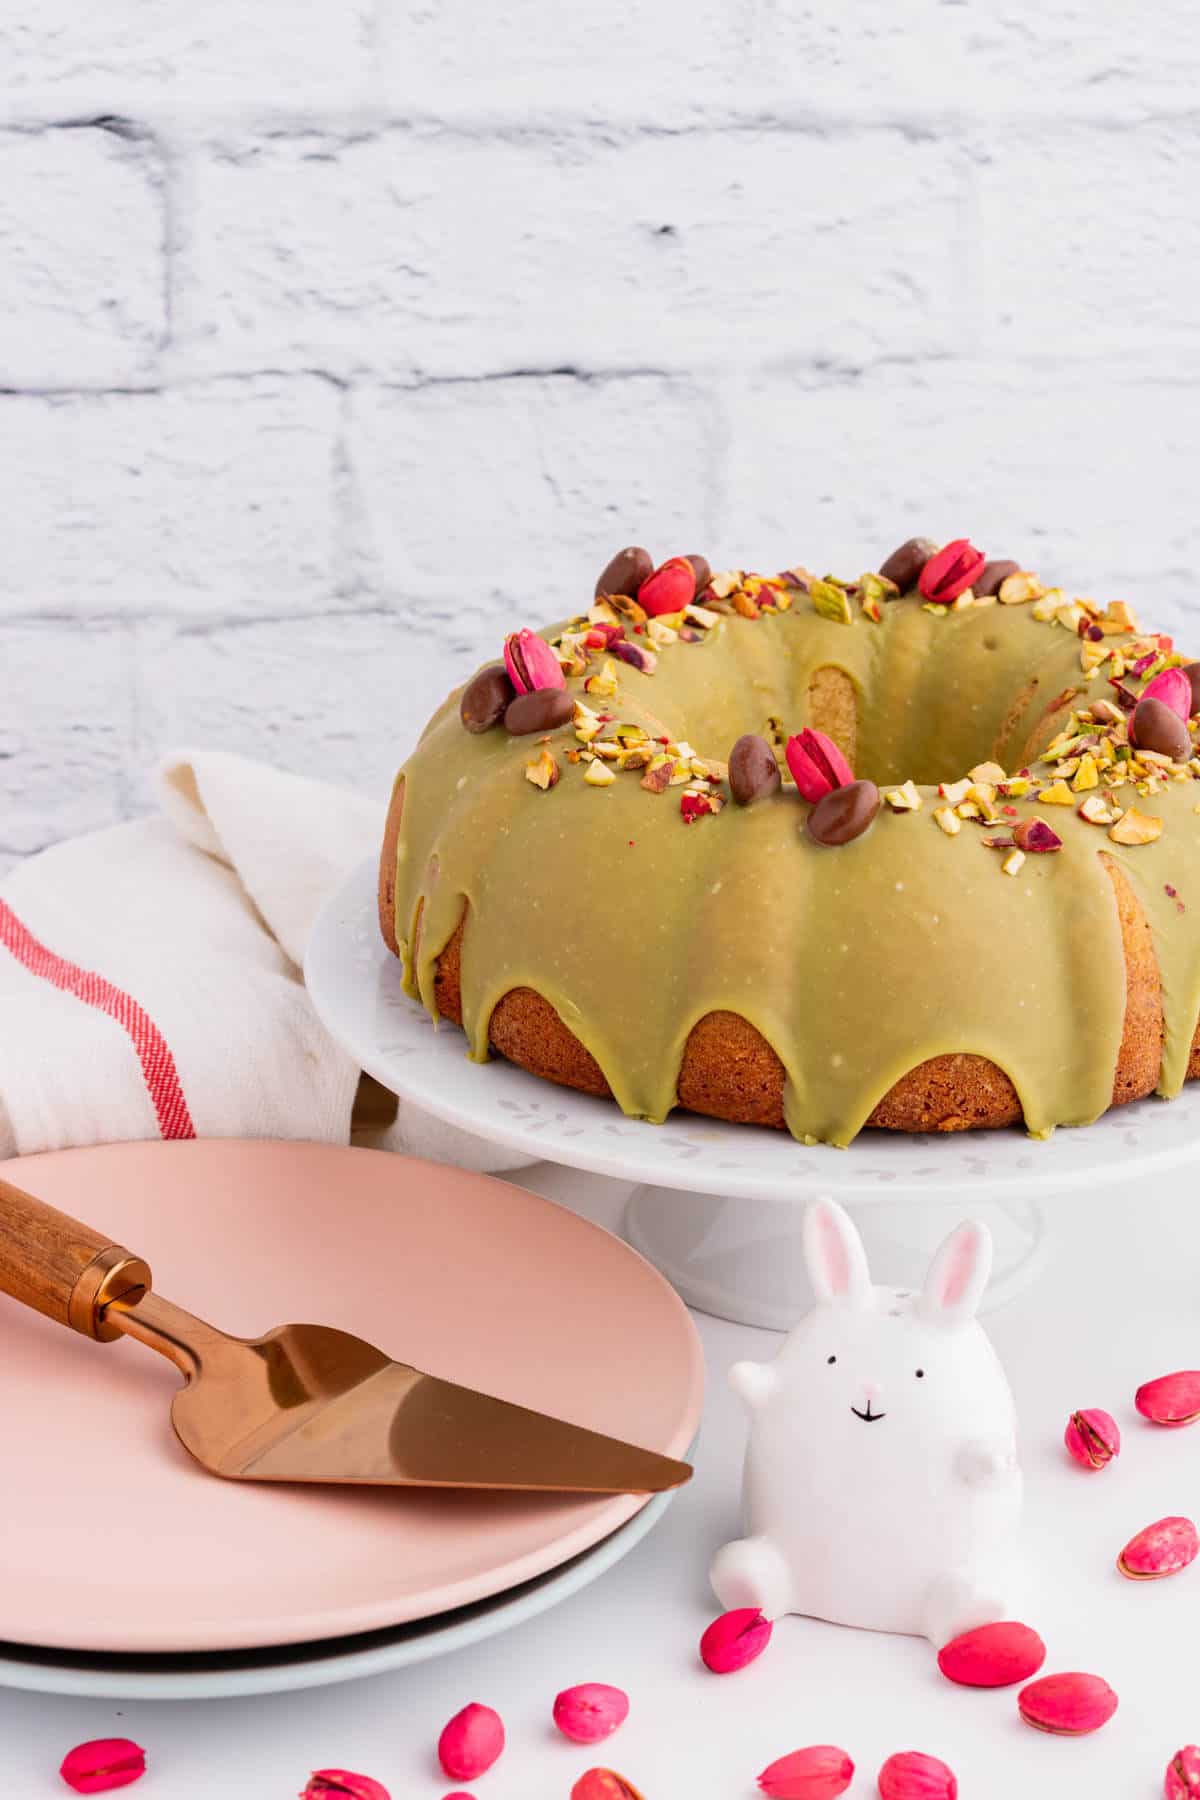 A green glazed bundt cake decorated with chopped pistachios, whole pink and chocolate pistachios.